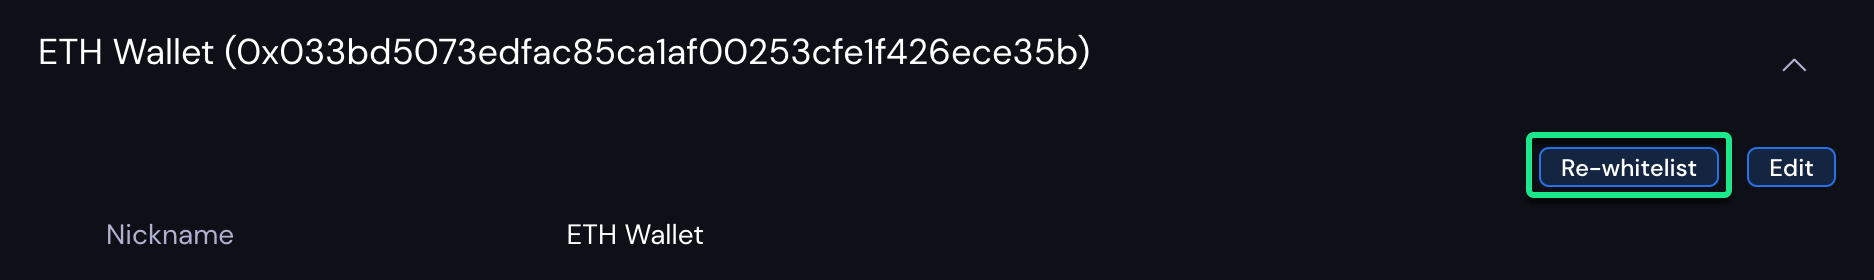 Re-whitelist button in crypto account.png